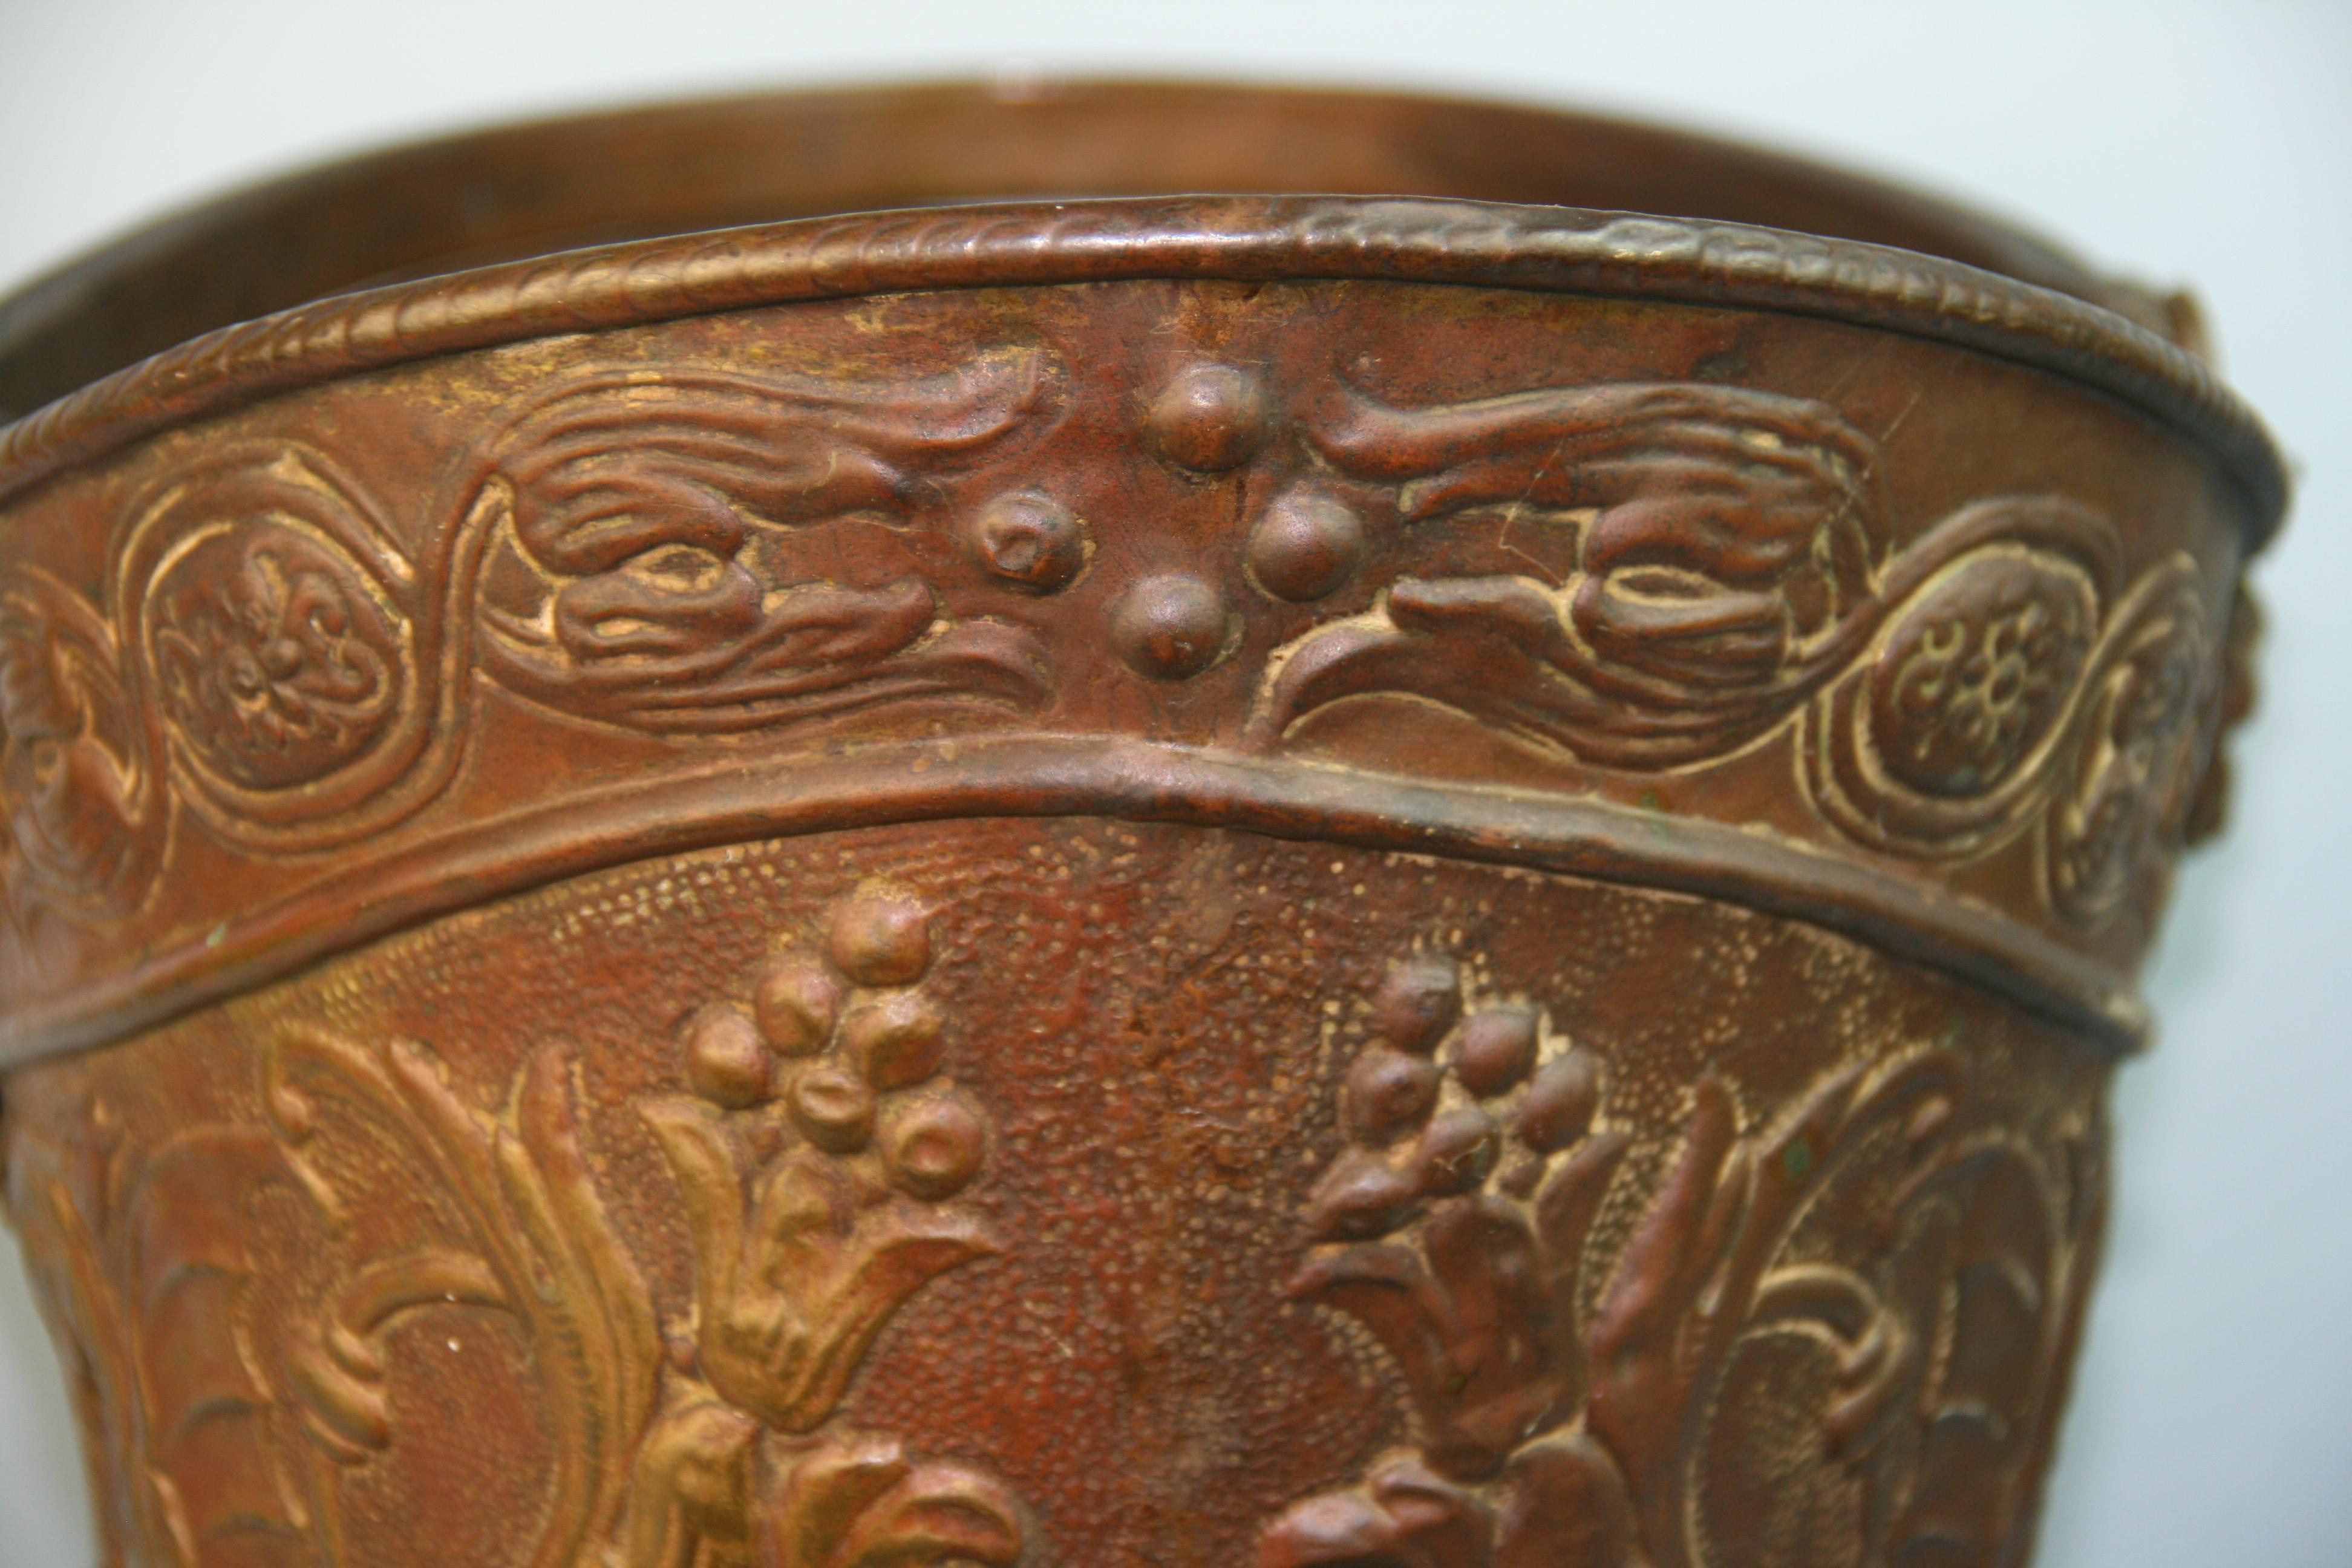 Victorian Embossed Coal/Wood Bucket Brass/Metal Late 19th Century For Sale 4